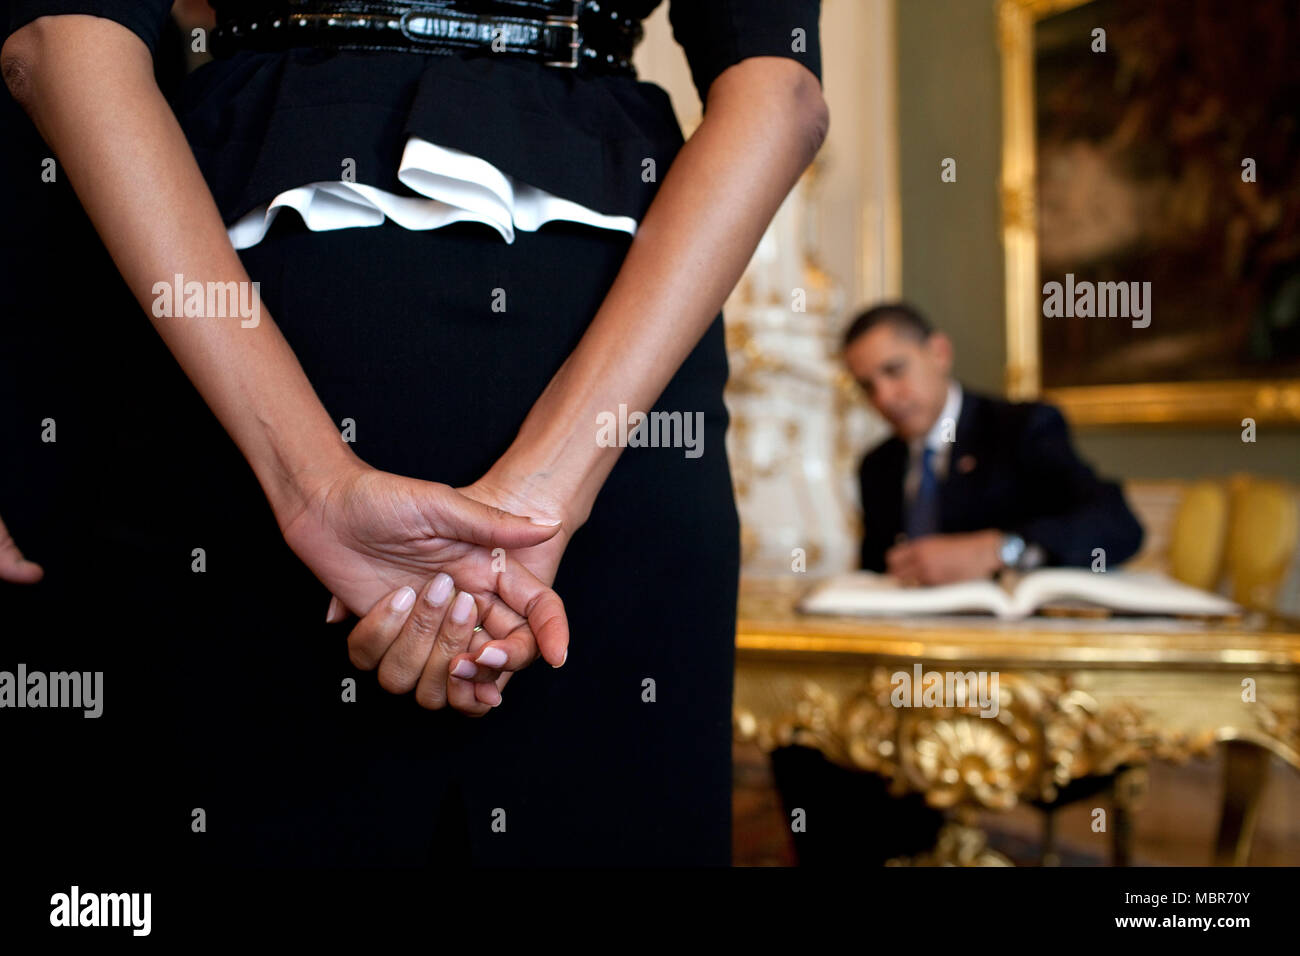 First Lady Michelle Obama waits as President Barack Obama, background, signs the guestbook upon their arrival to Prague Castle,  April 5, 2009, in the Czech Republic. White House Photo/Pete Souza Stock Photo